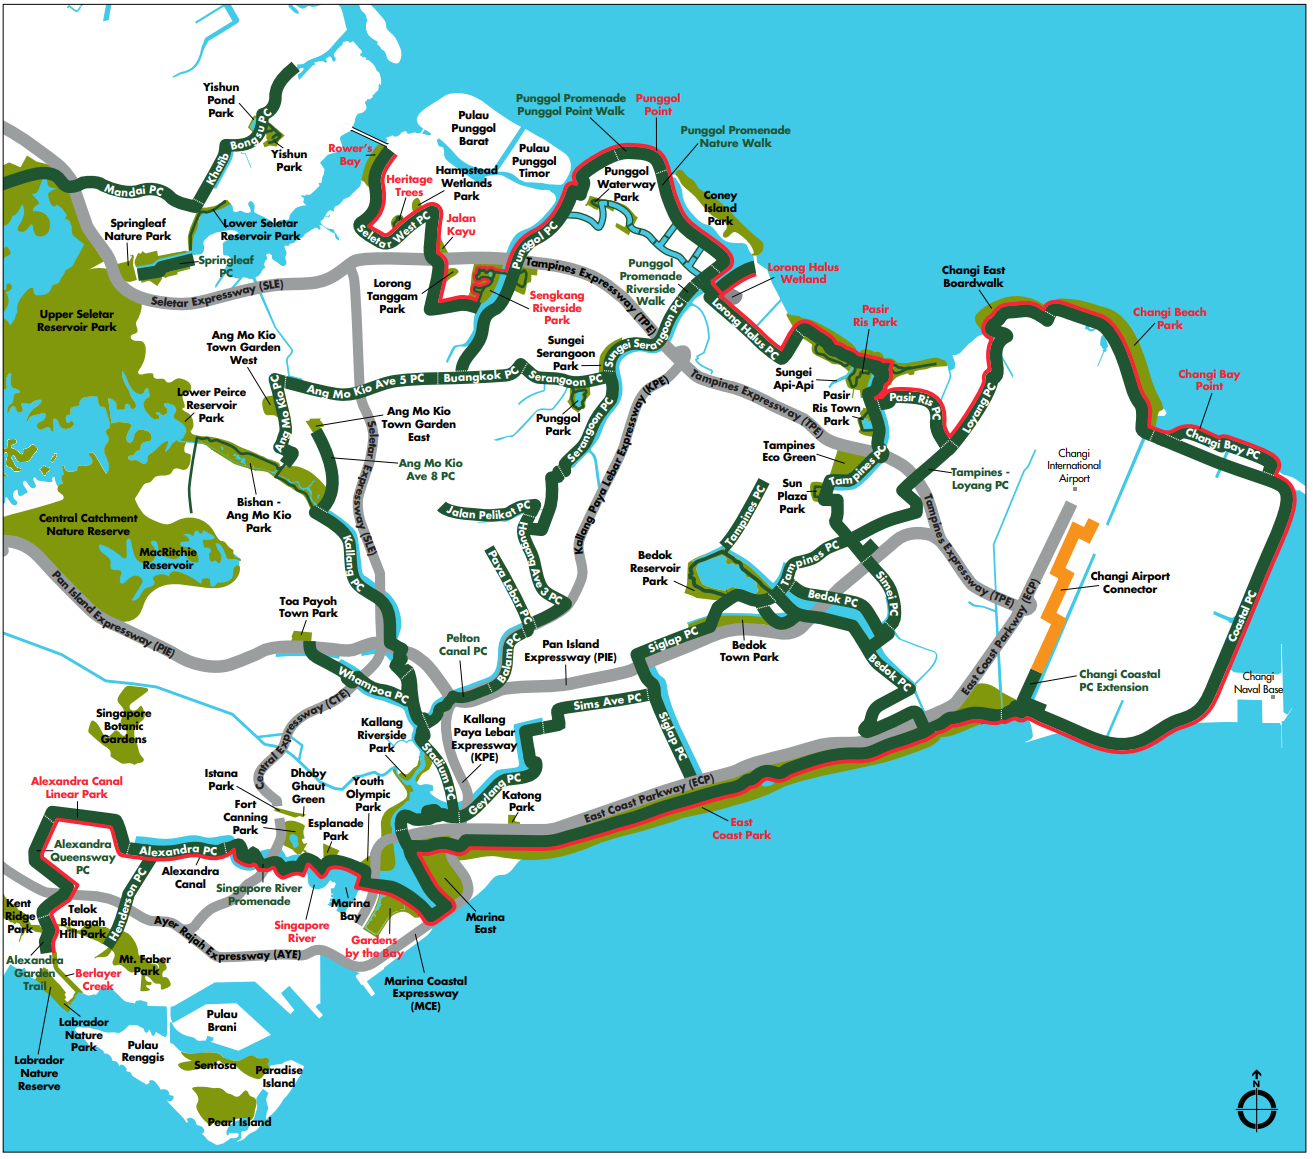 hiking trails in Singapore - Round Island Route